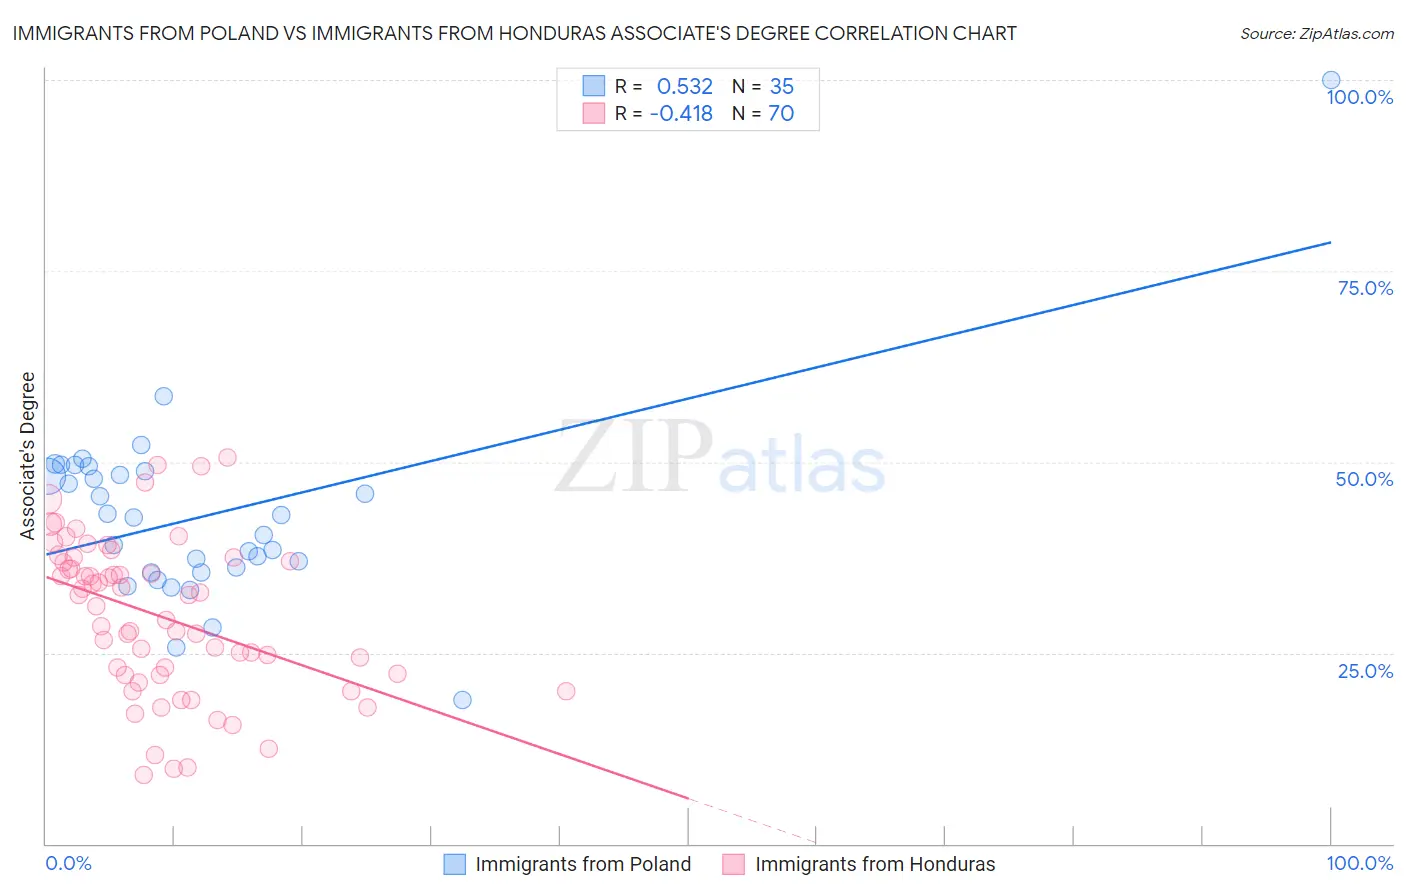 Immigrants from Poland vs Immigrants from Honduras Associate's Degree